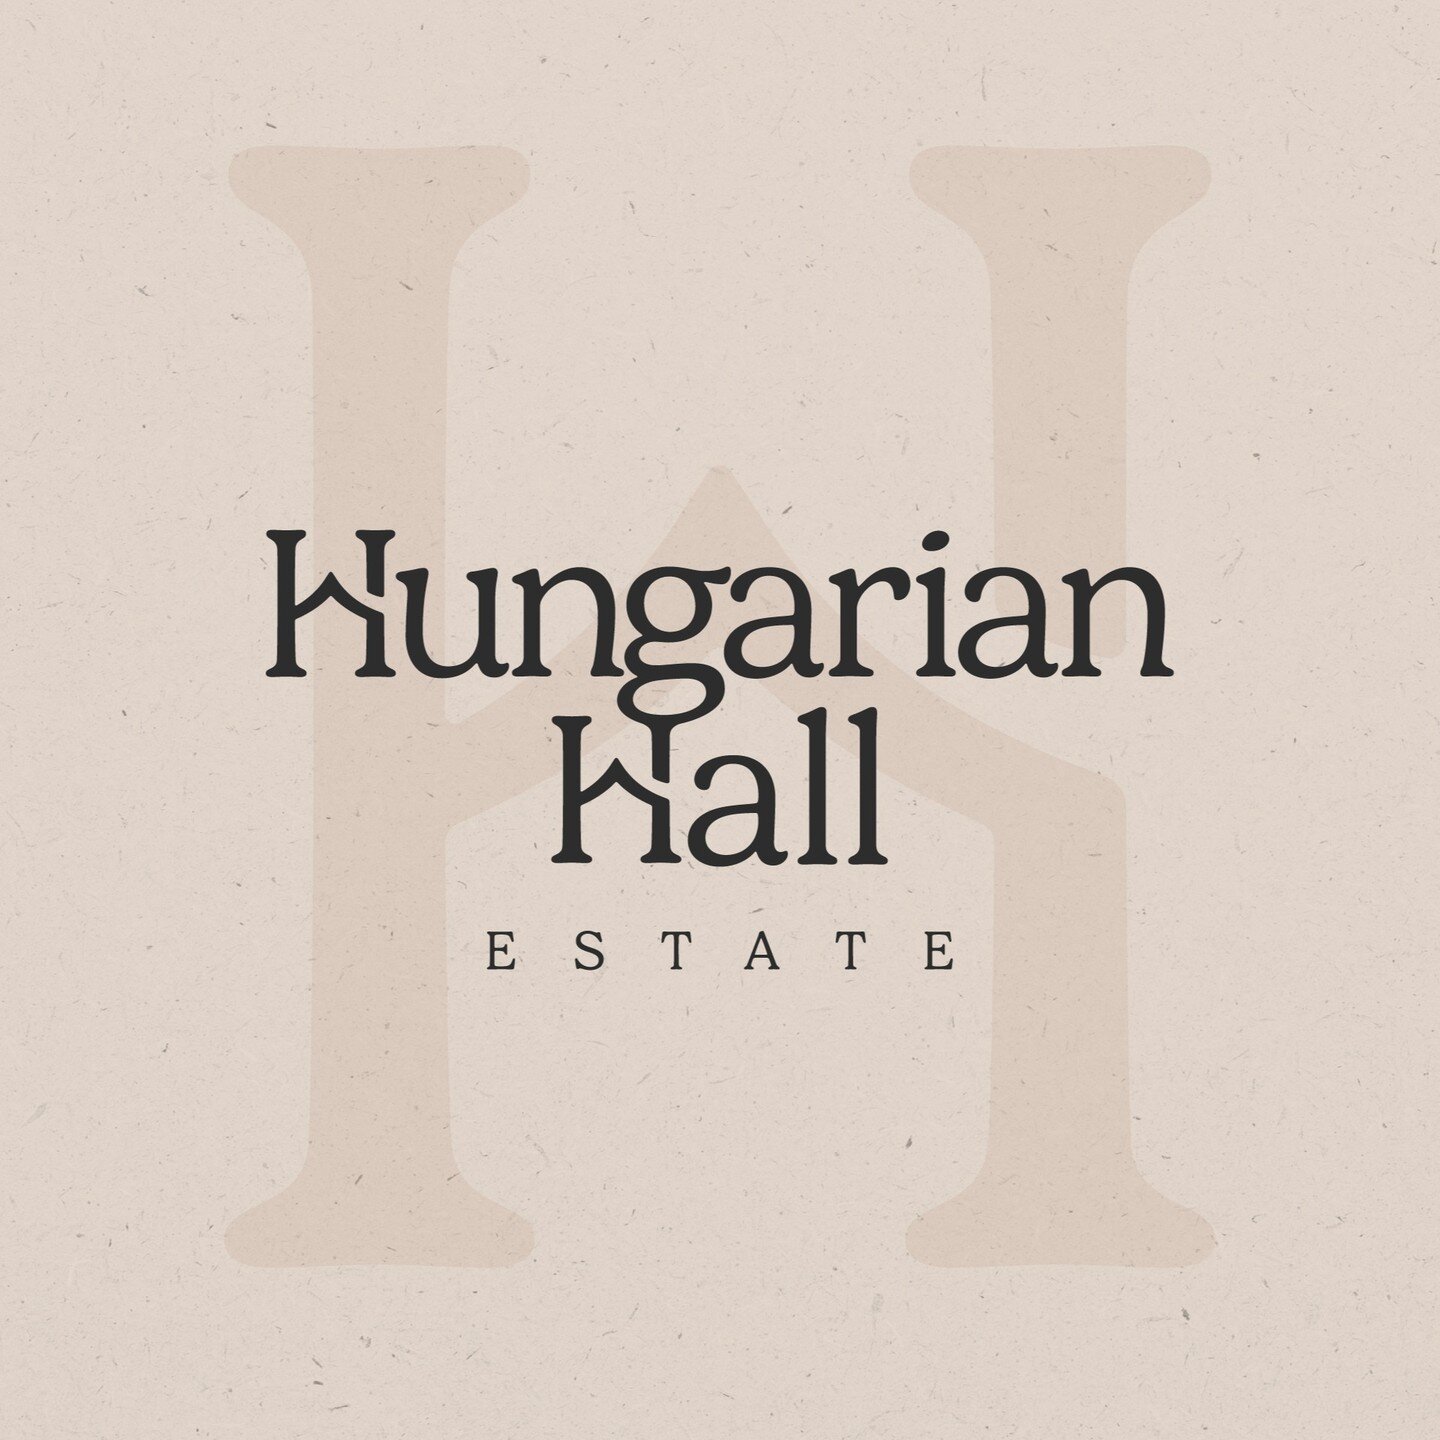 Introducing our new brand and identity.

Welcome to Hungarian Hall Estate, a destination venue where you can hold your perfect wedding, enjoy a milestone party or enjoy a stay in the beautiful Suffolk countryside.

A family run business where custome